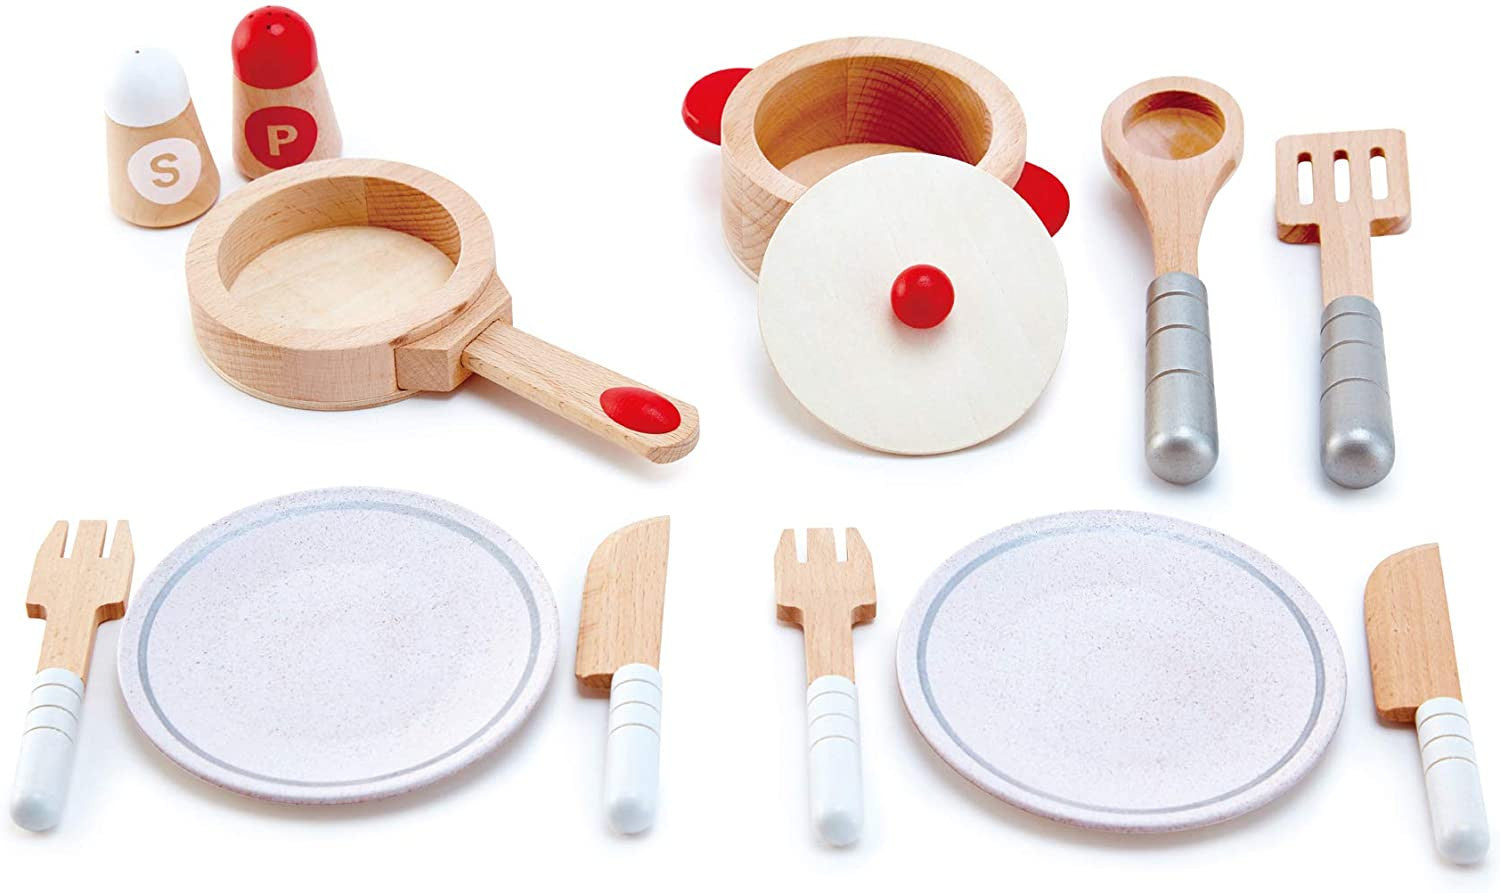 Hape Cook & Serve Set E3150, 13 Piece Wooden Pretend Play Cooking Set with Accessories